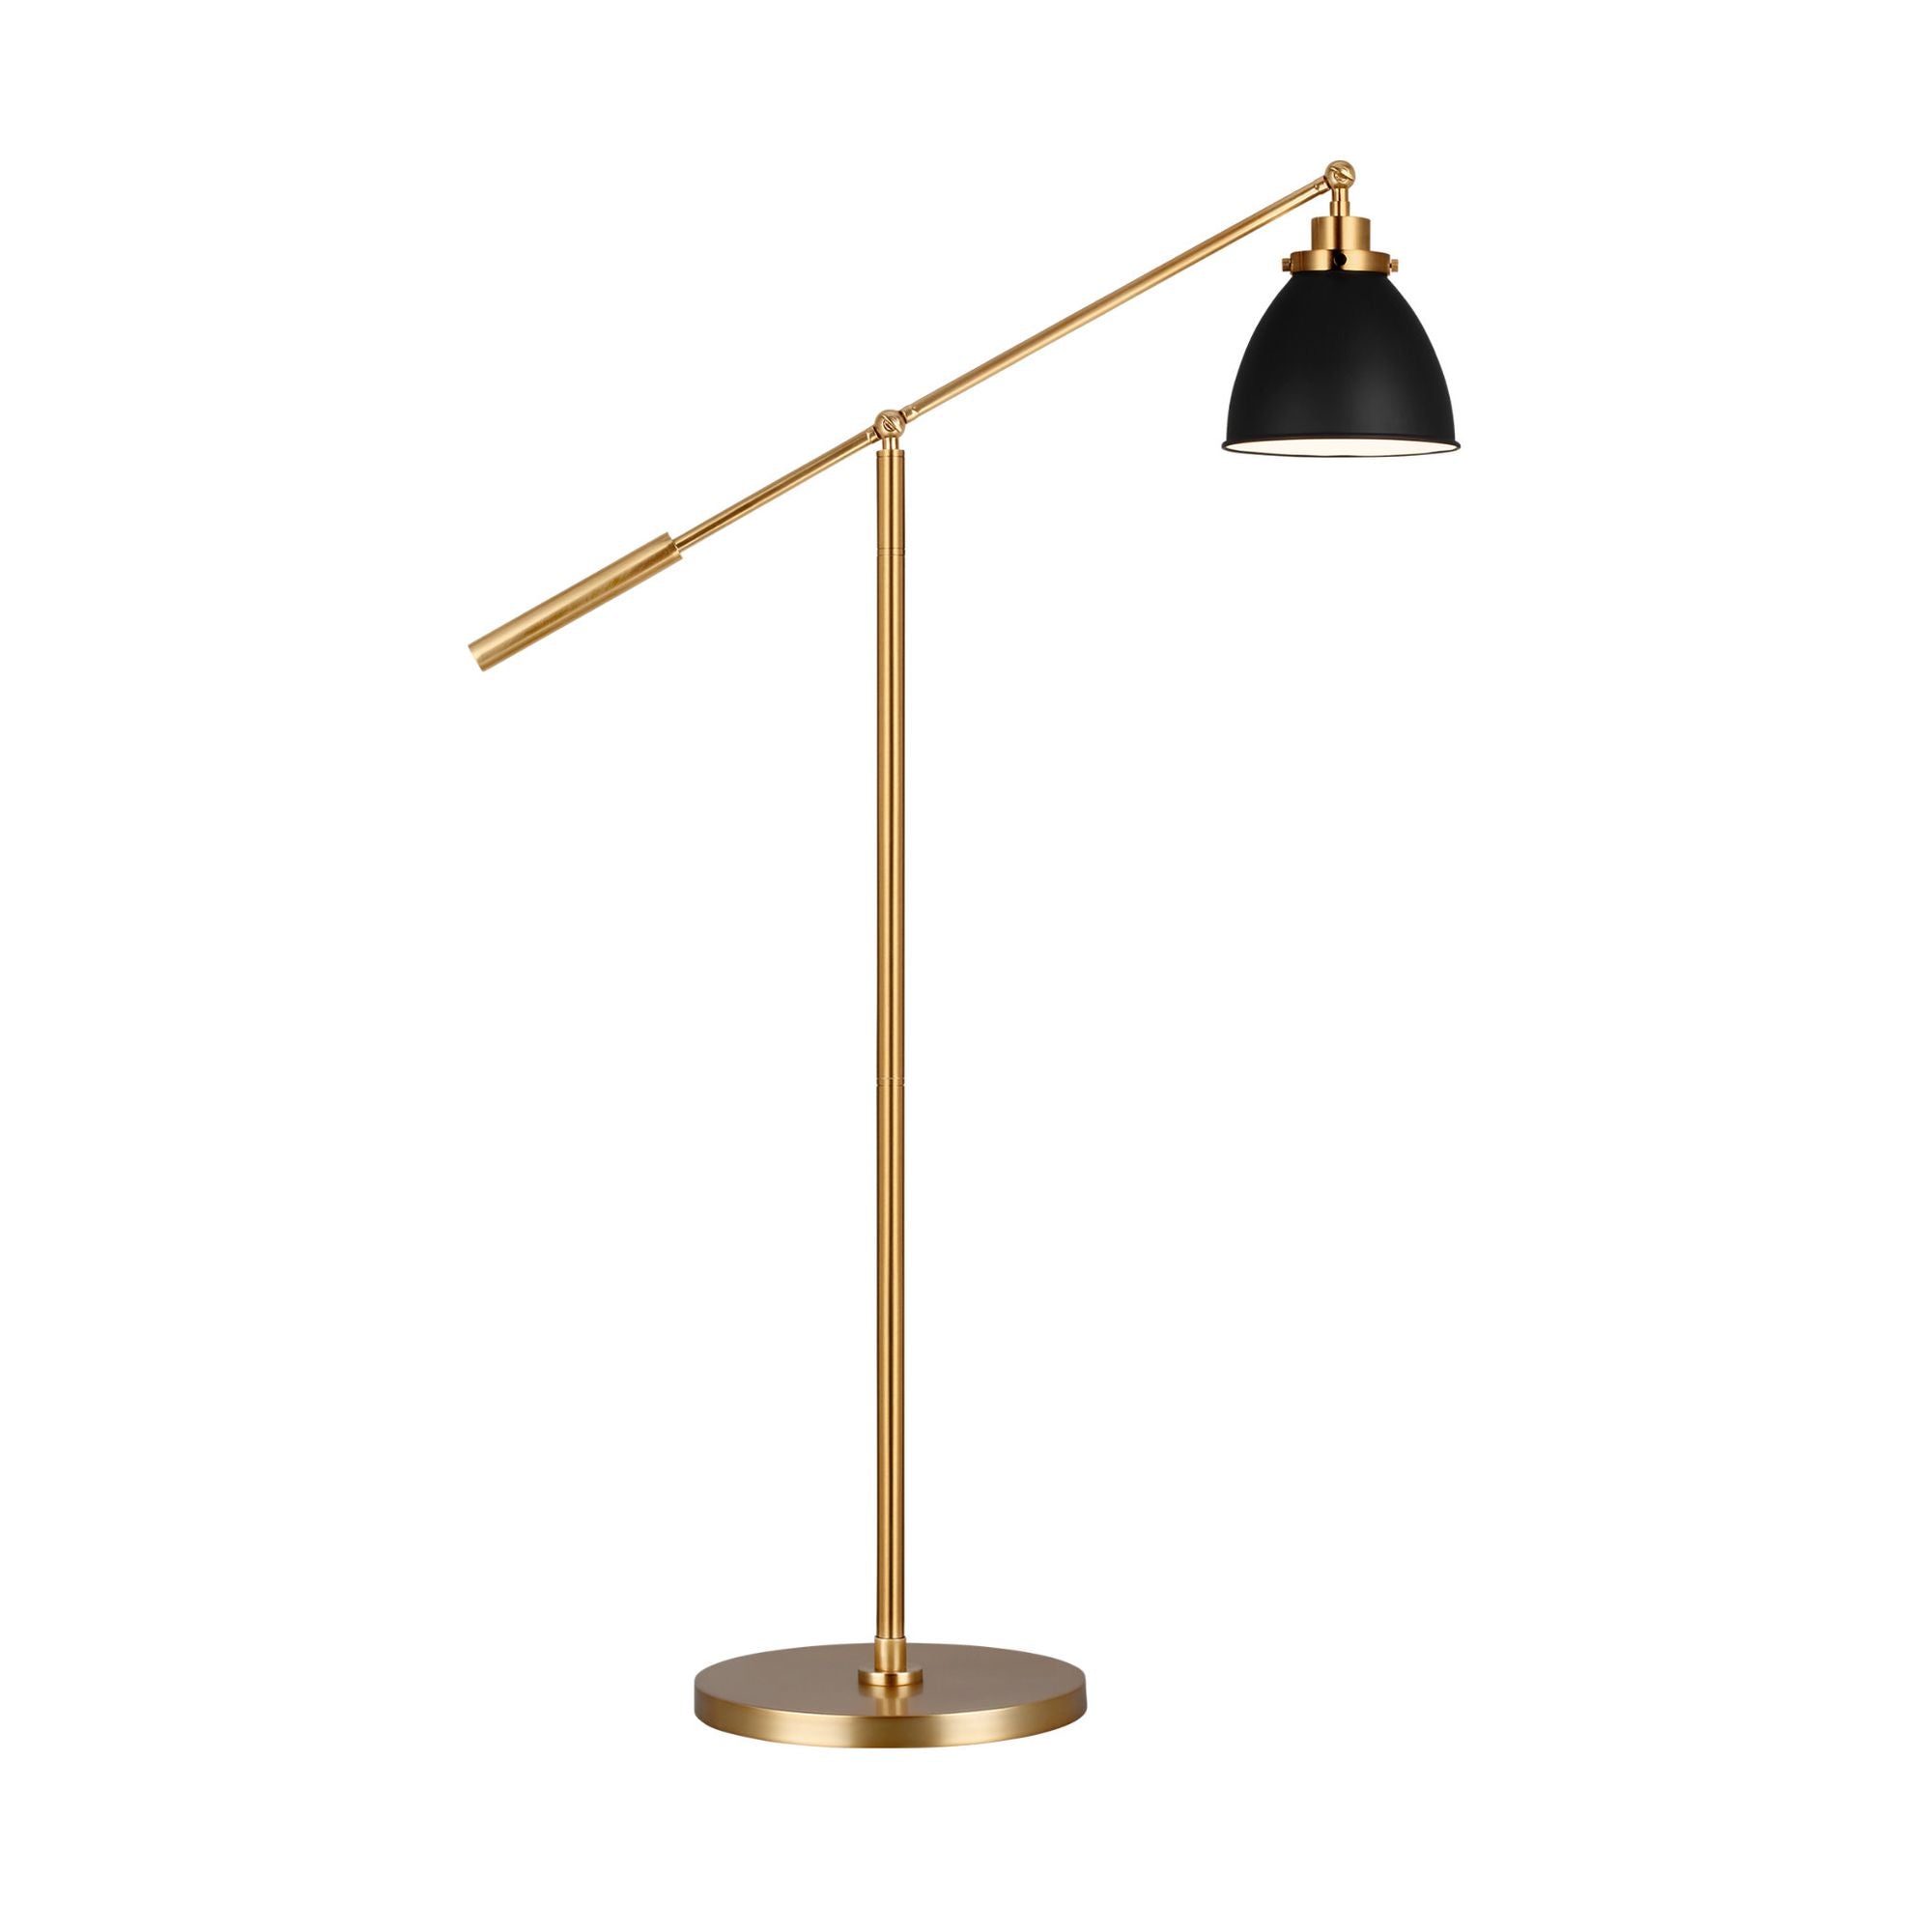 Chapman & Myers Wellfleet Dome Floor Lamp in Midnight Black and Burnished Brass